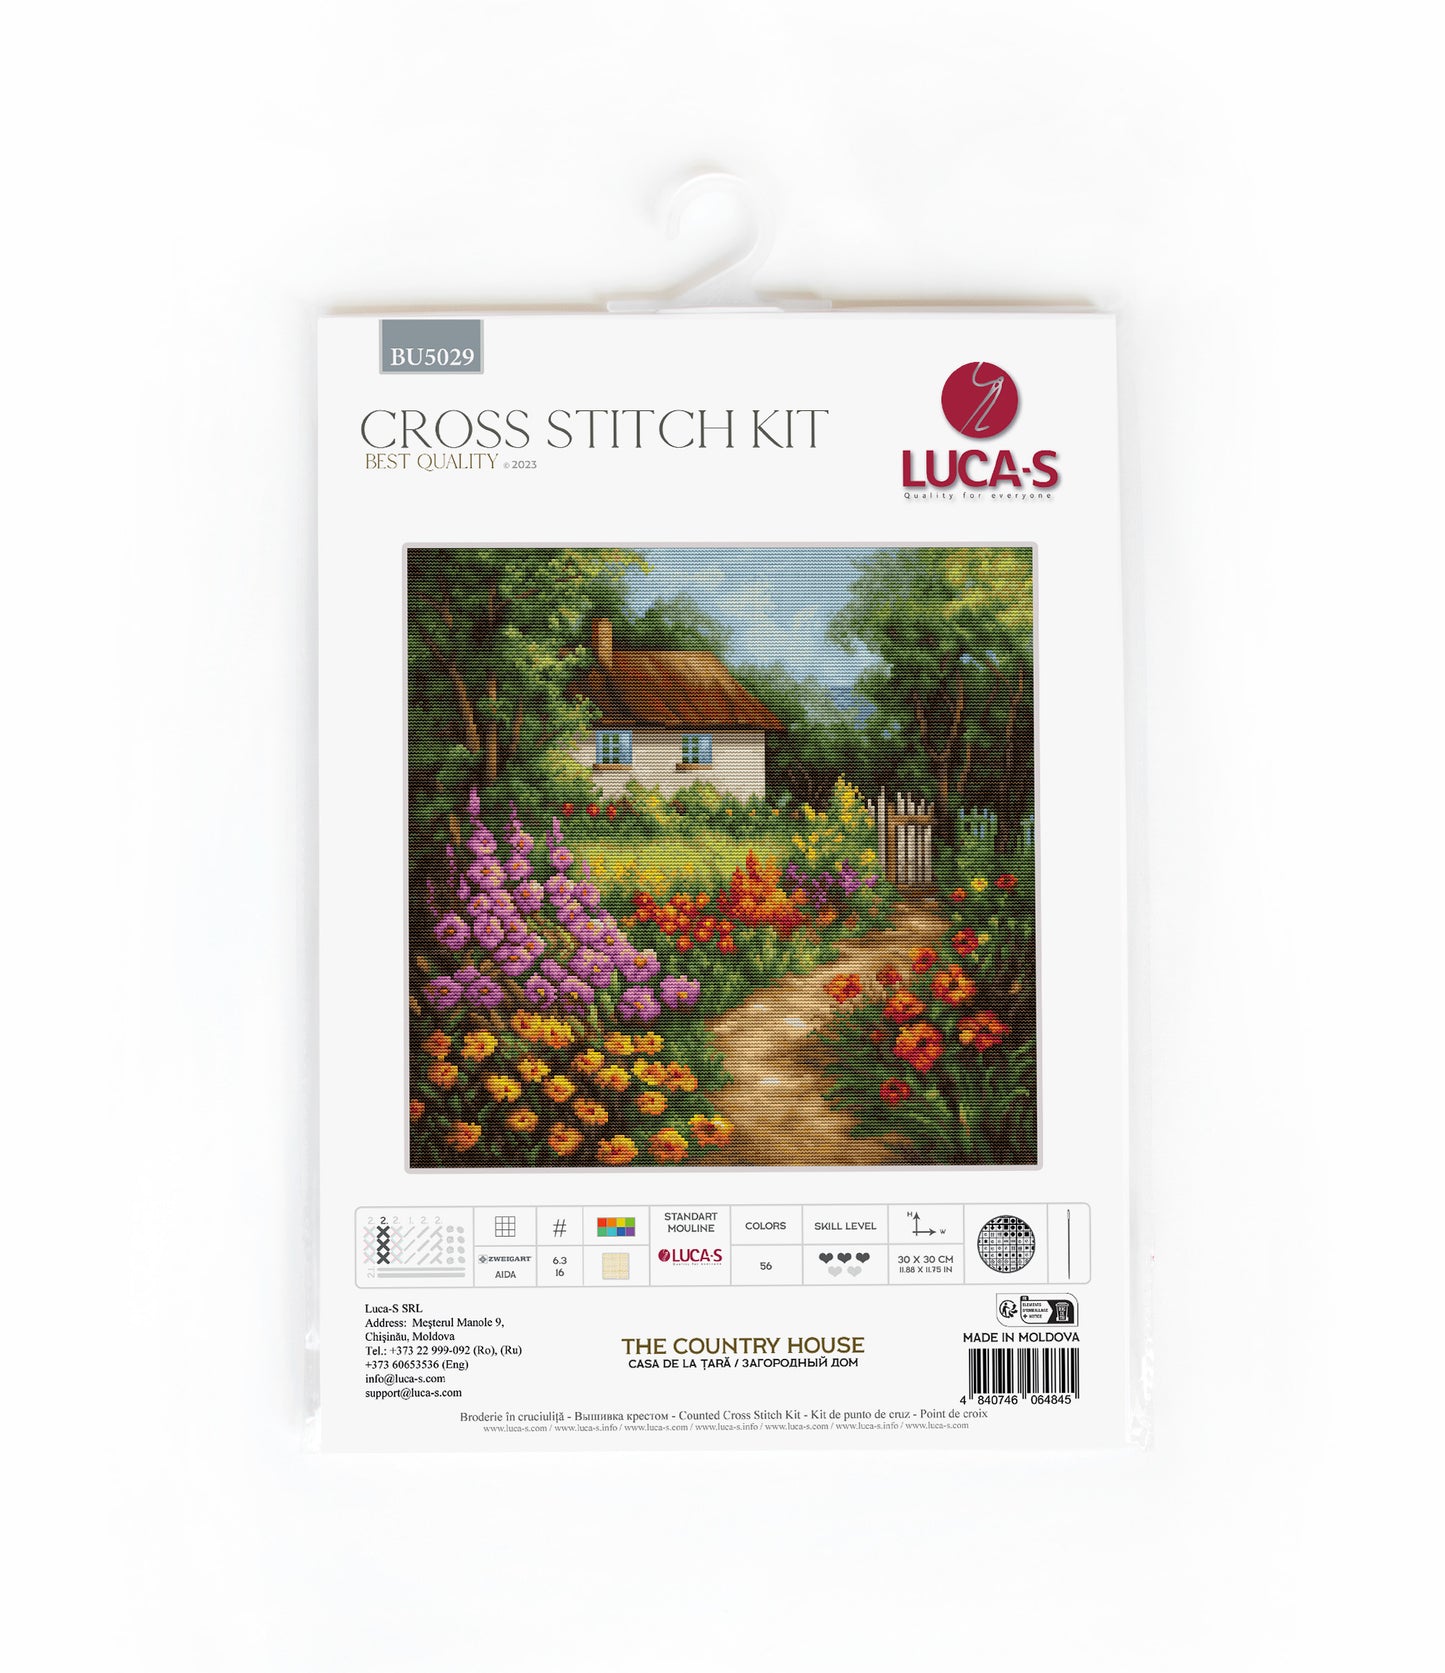 Cross Stitch Kit Luca-S - The Country House, BU5029